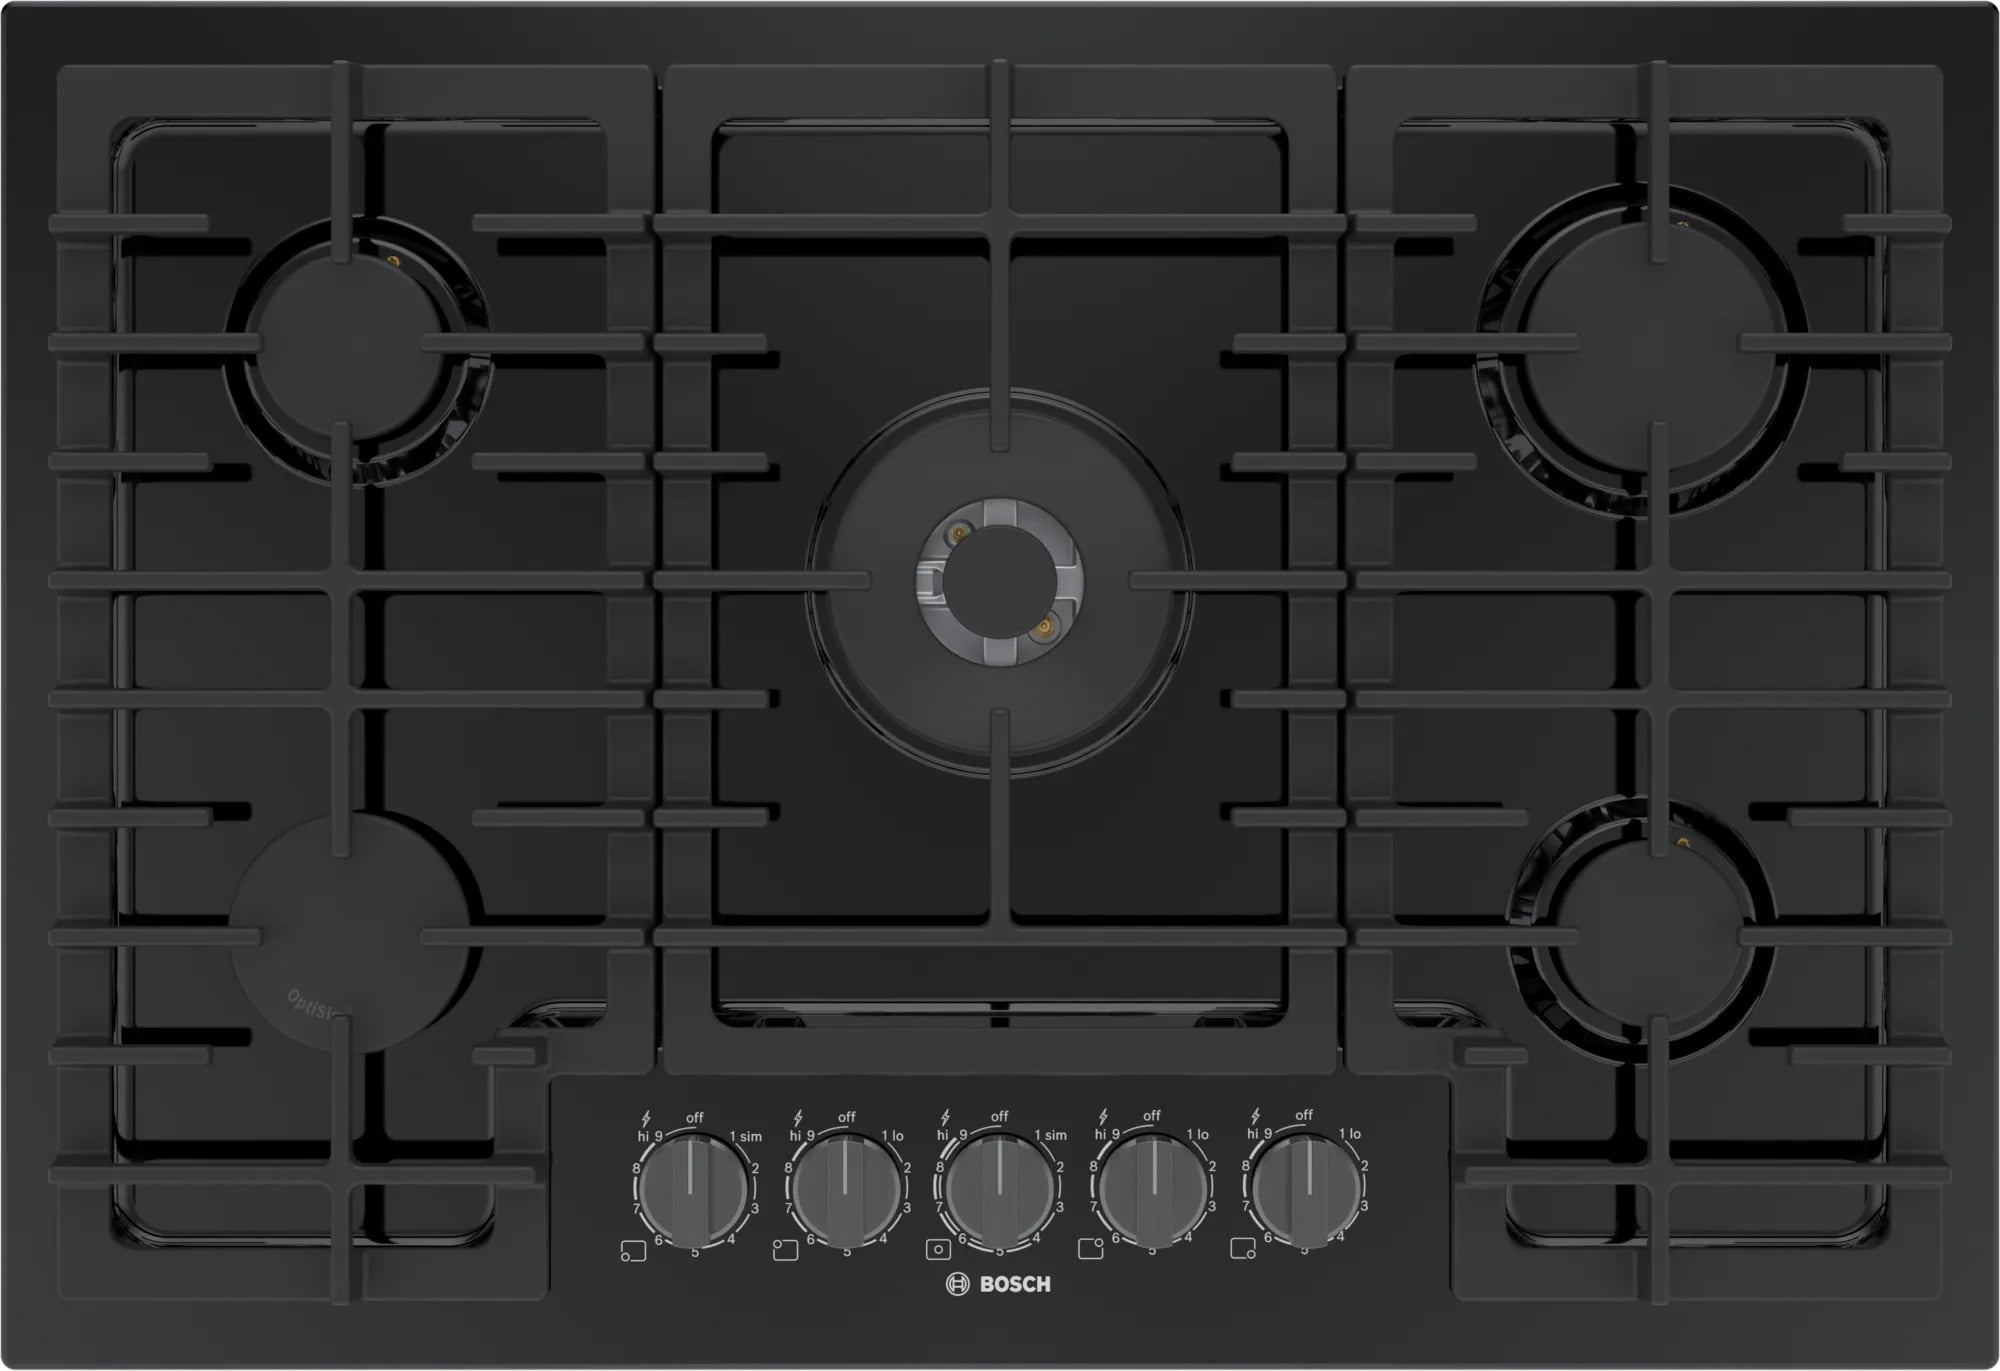 Bosch - 31 inch wide Gas Cooktop in Black - NGM8048UC